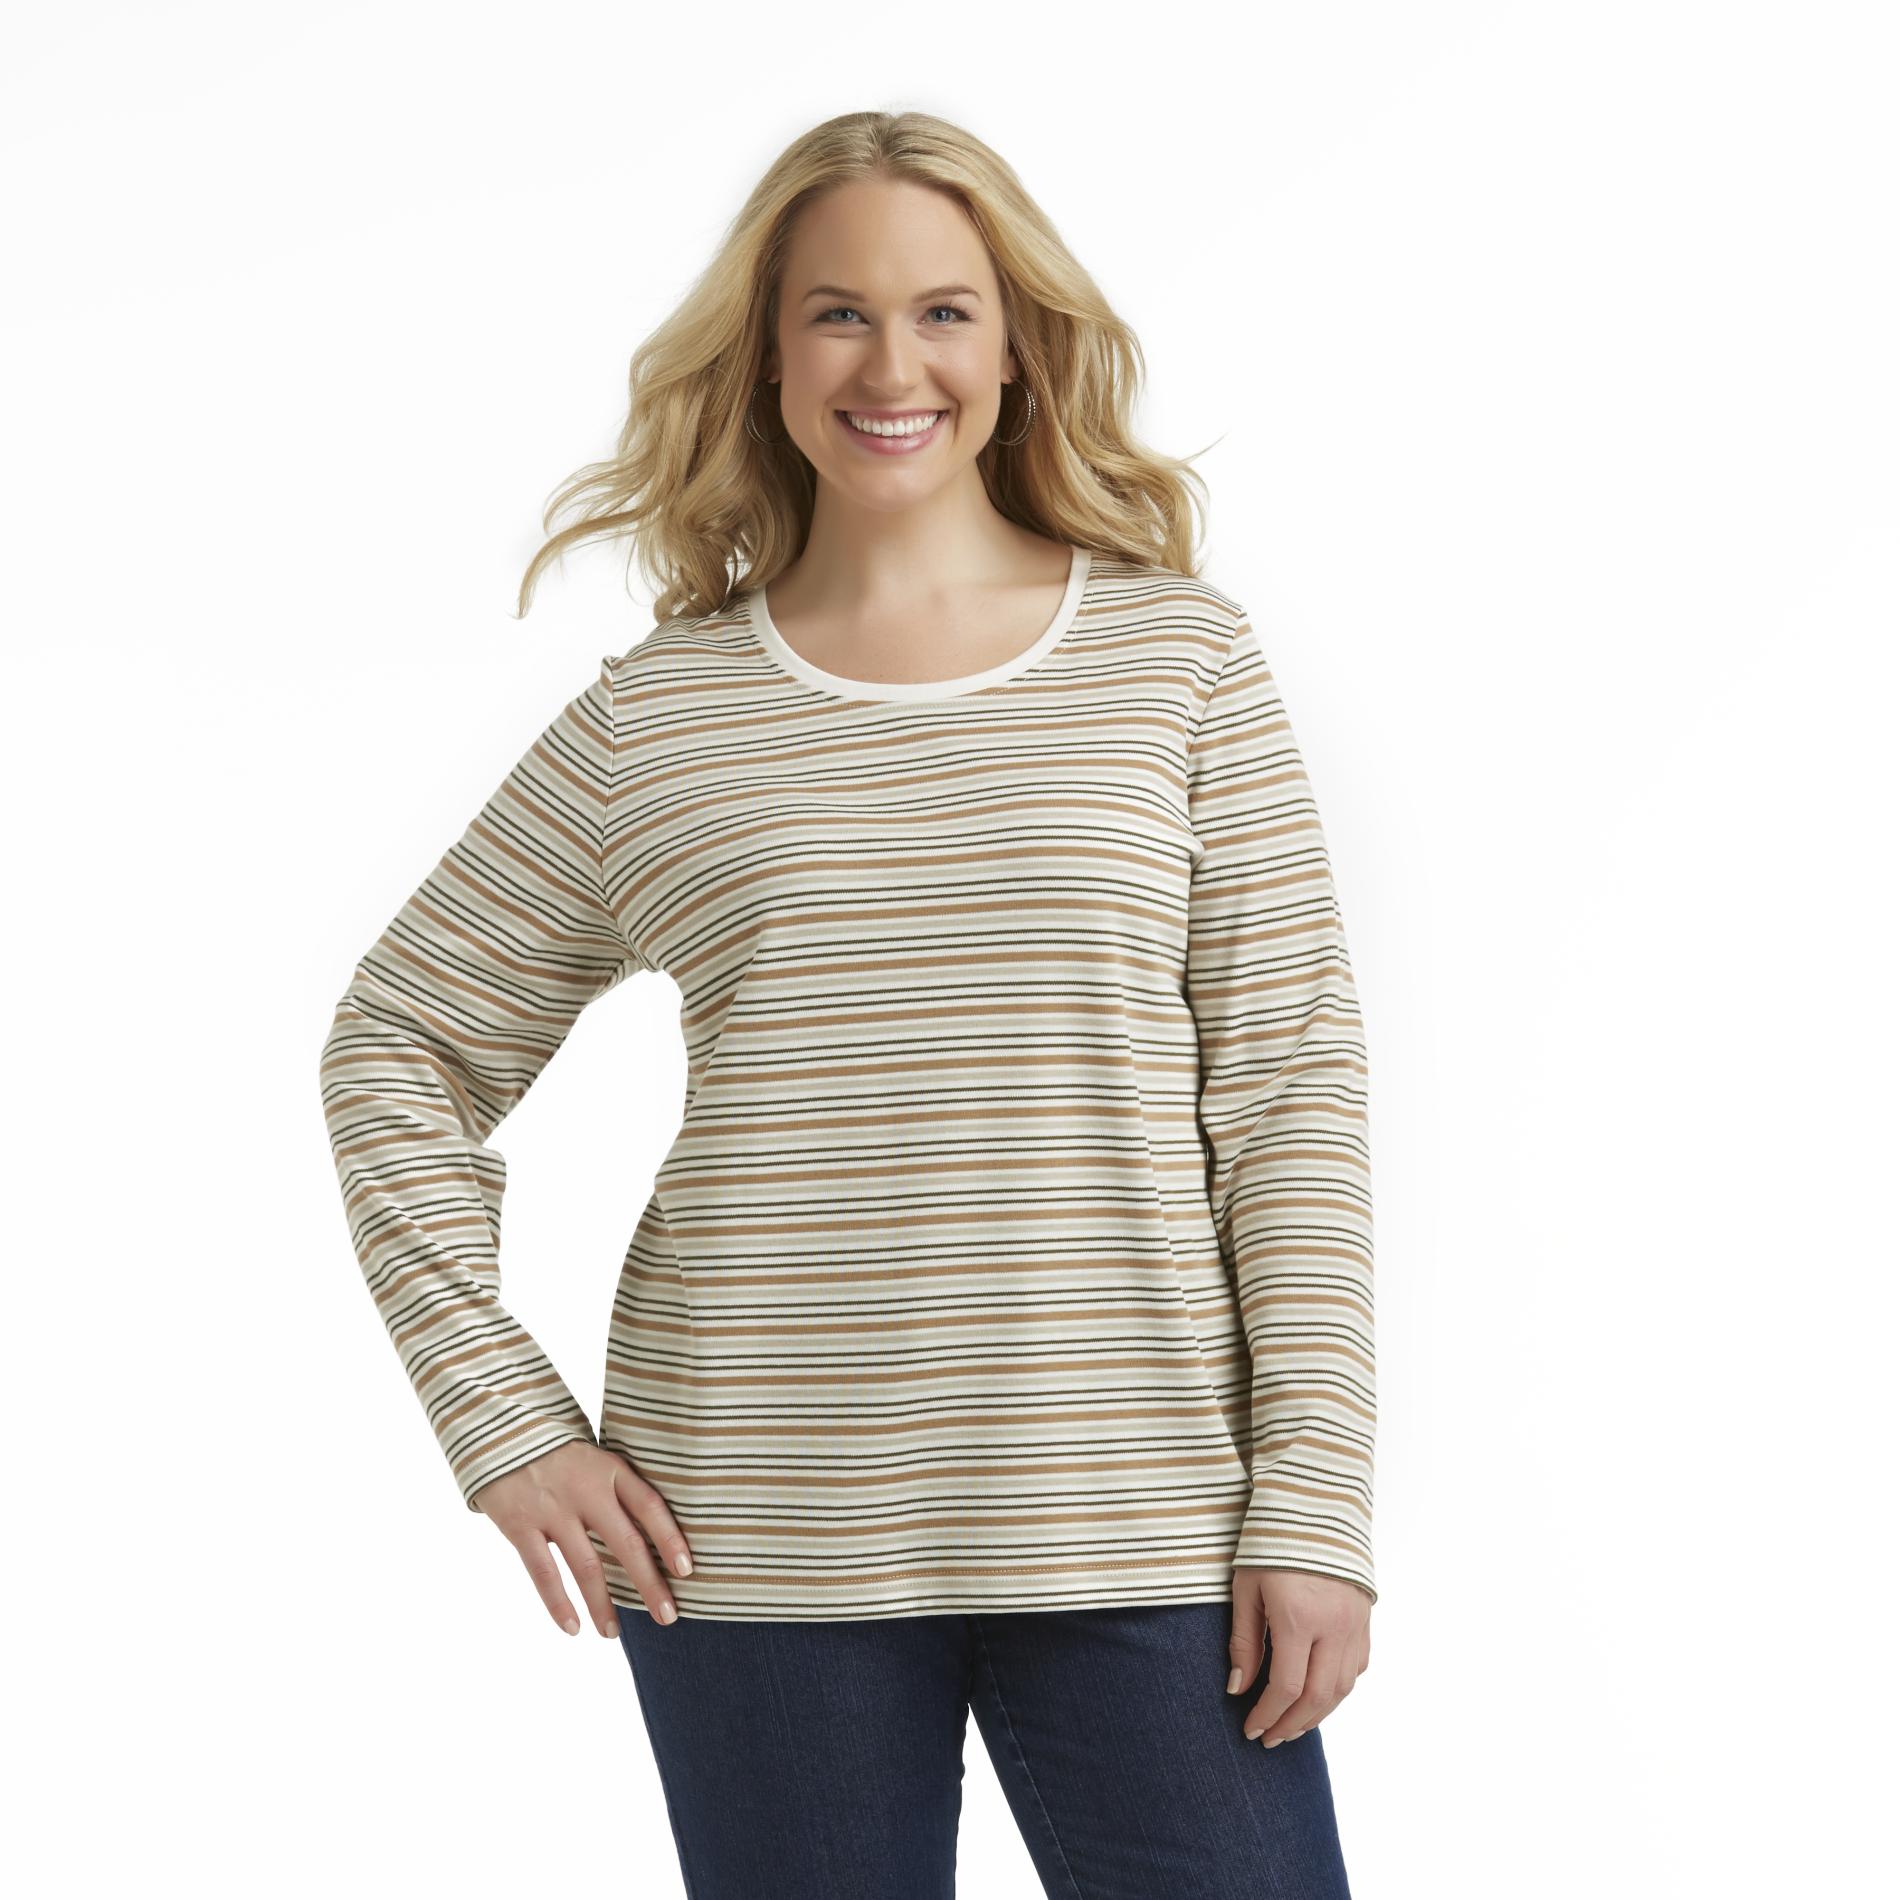 Basic Editions Women's Plus Long-Sleeve Knit Top - Striped